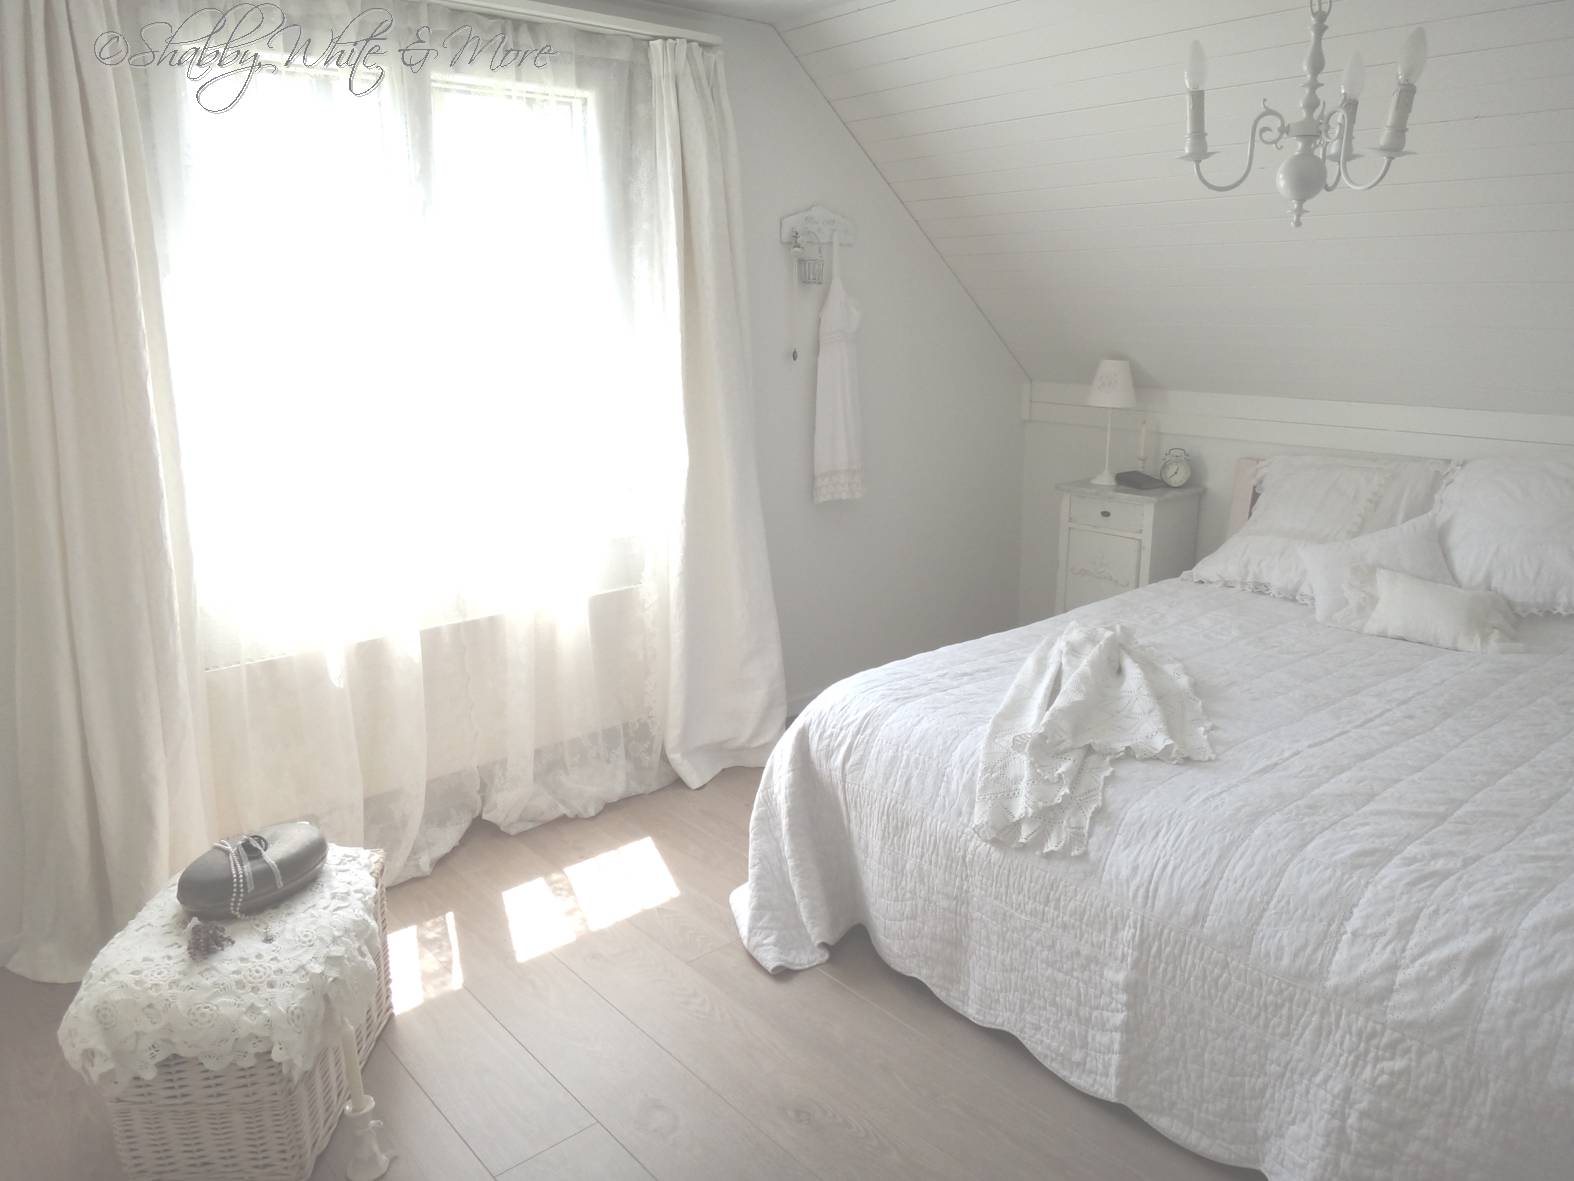 Shabby White And More Neues Schlafzimmer